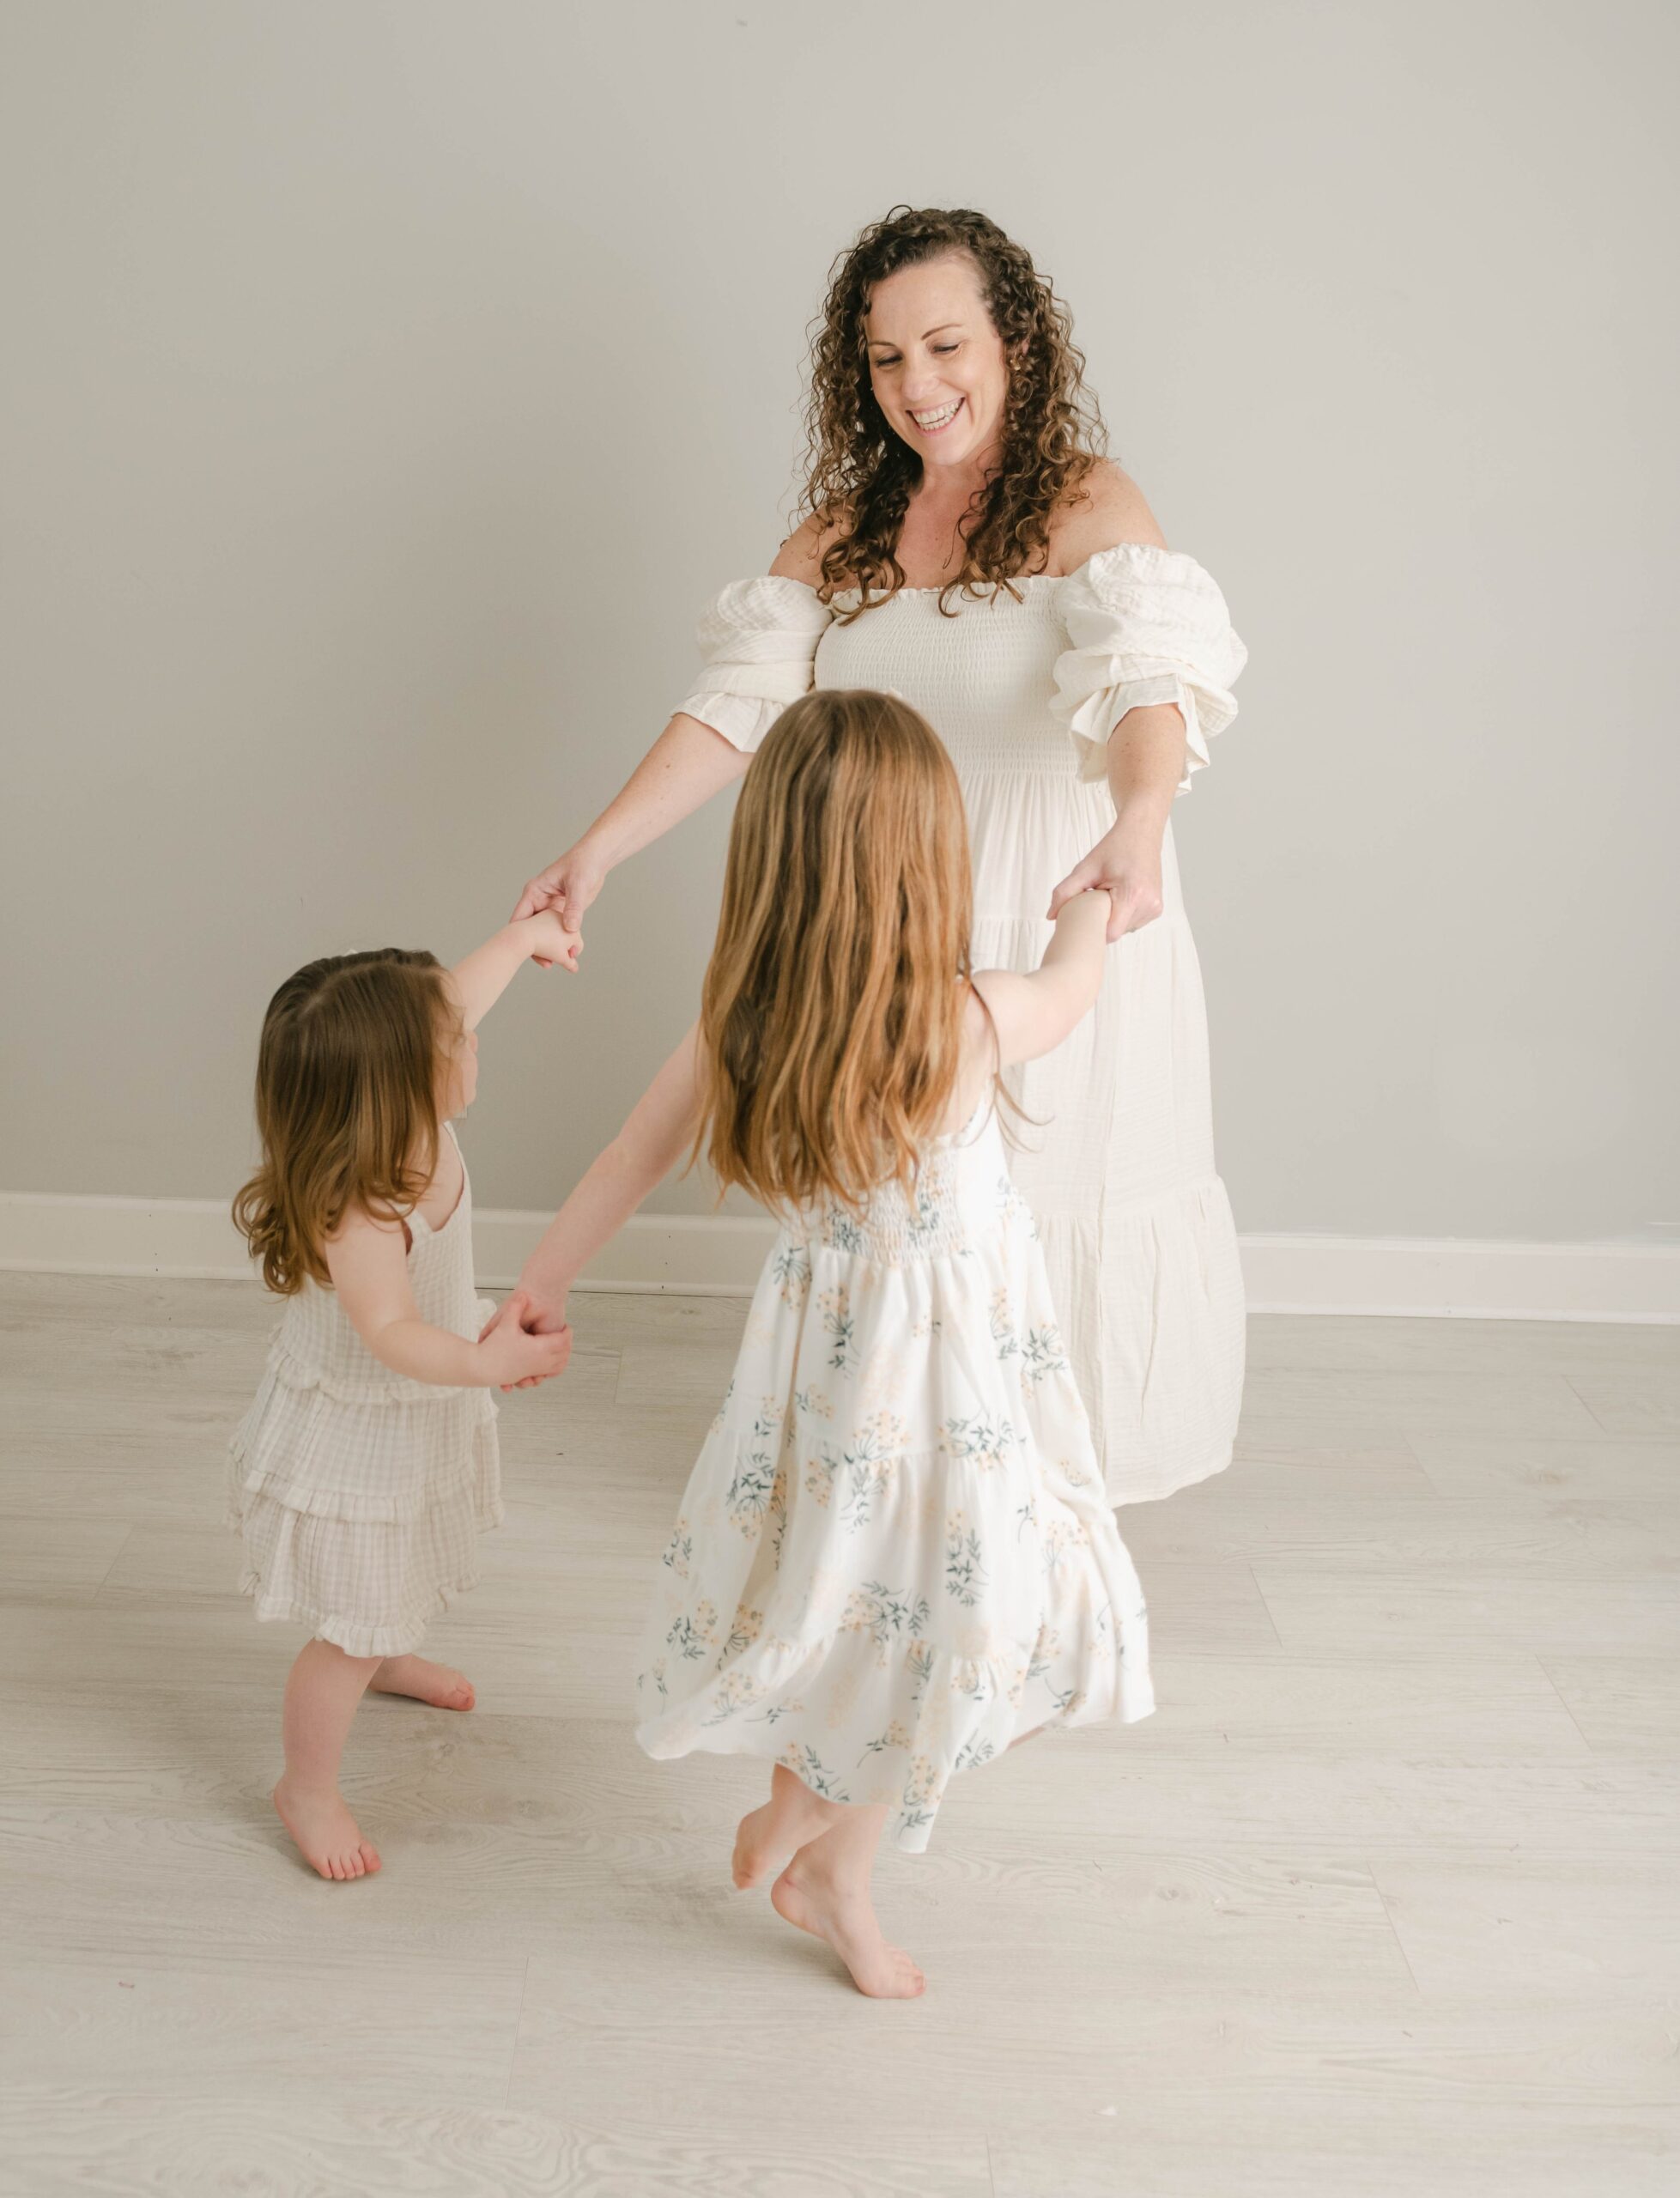 A mother dances with her two young daughters iin white dresses in a studio Chester county obgyn